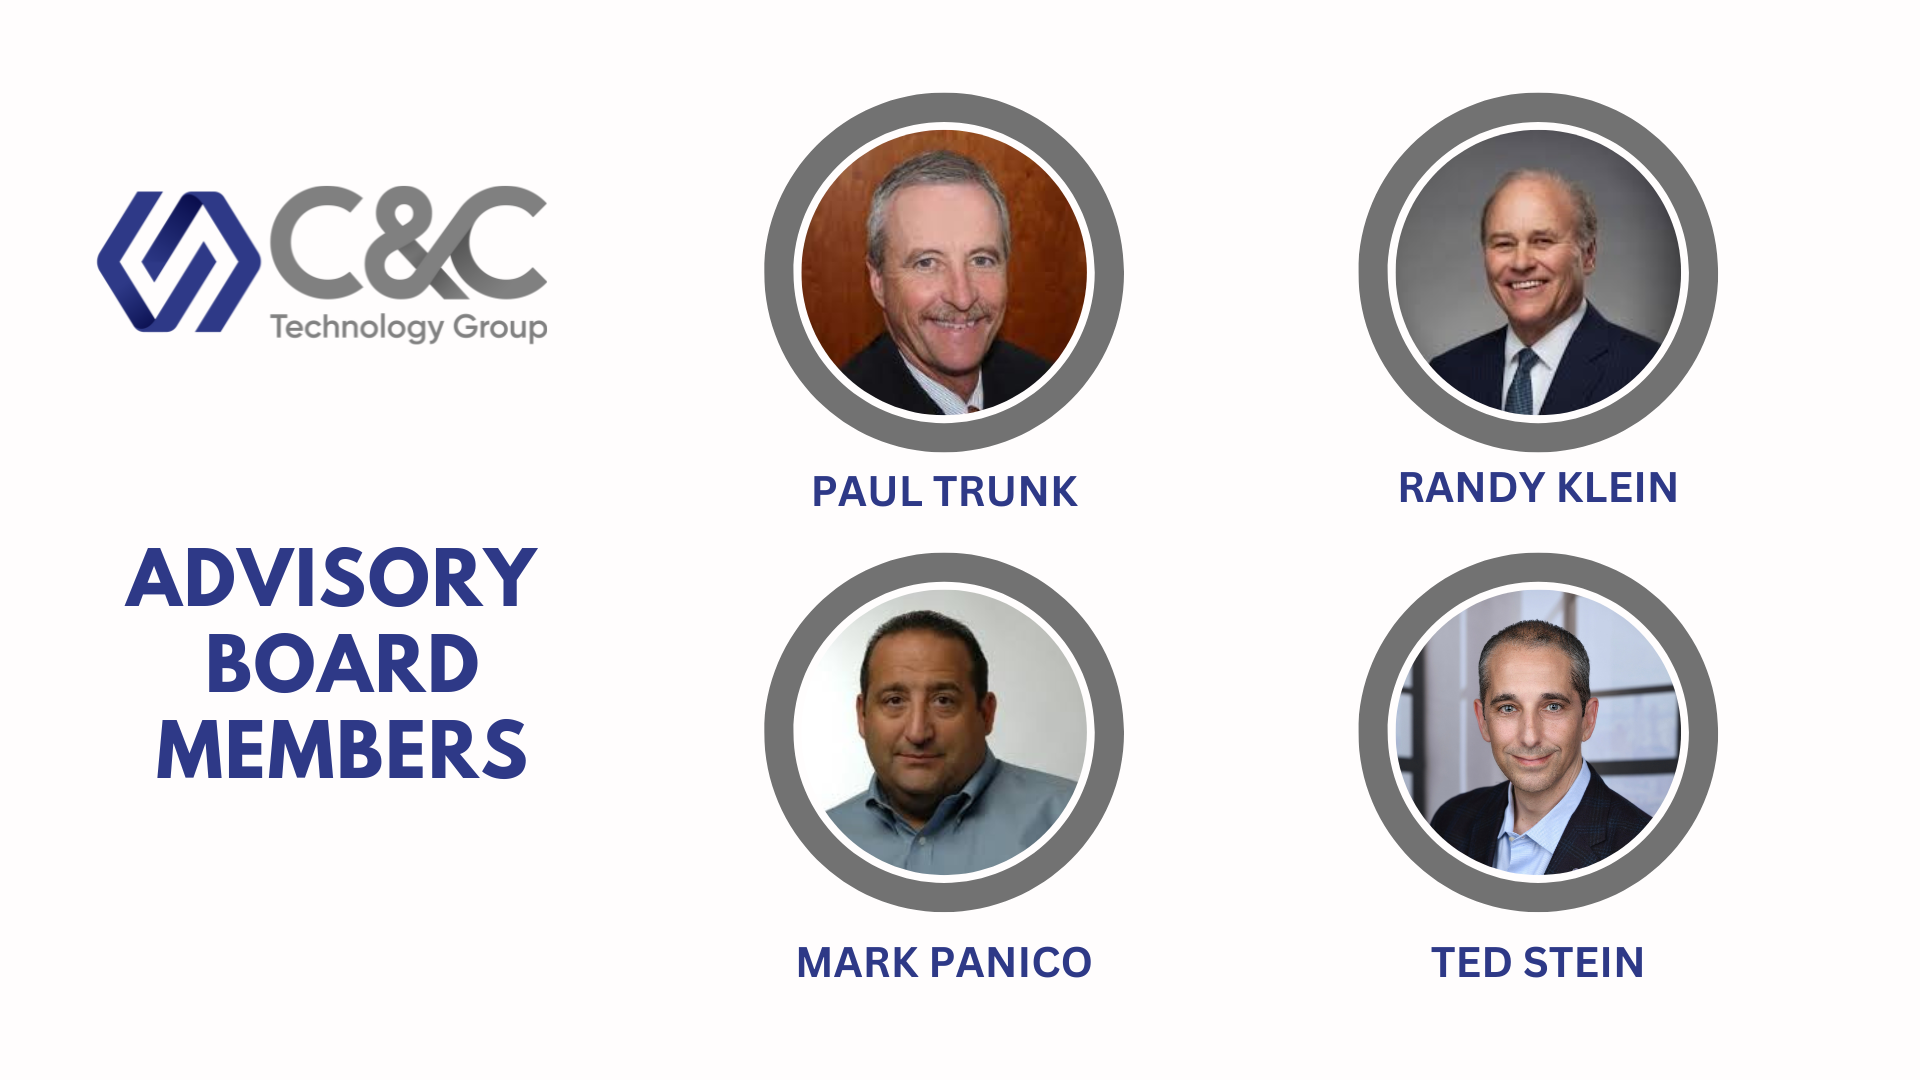 C&C Technology Group Announces Formation of Advisory Board to Enhance Strategic Direction